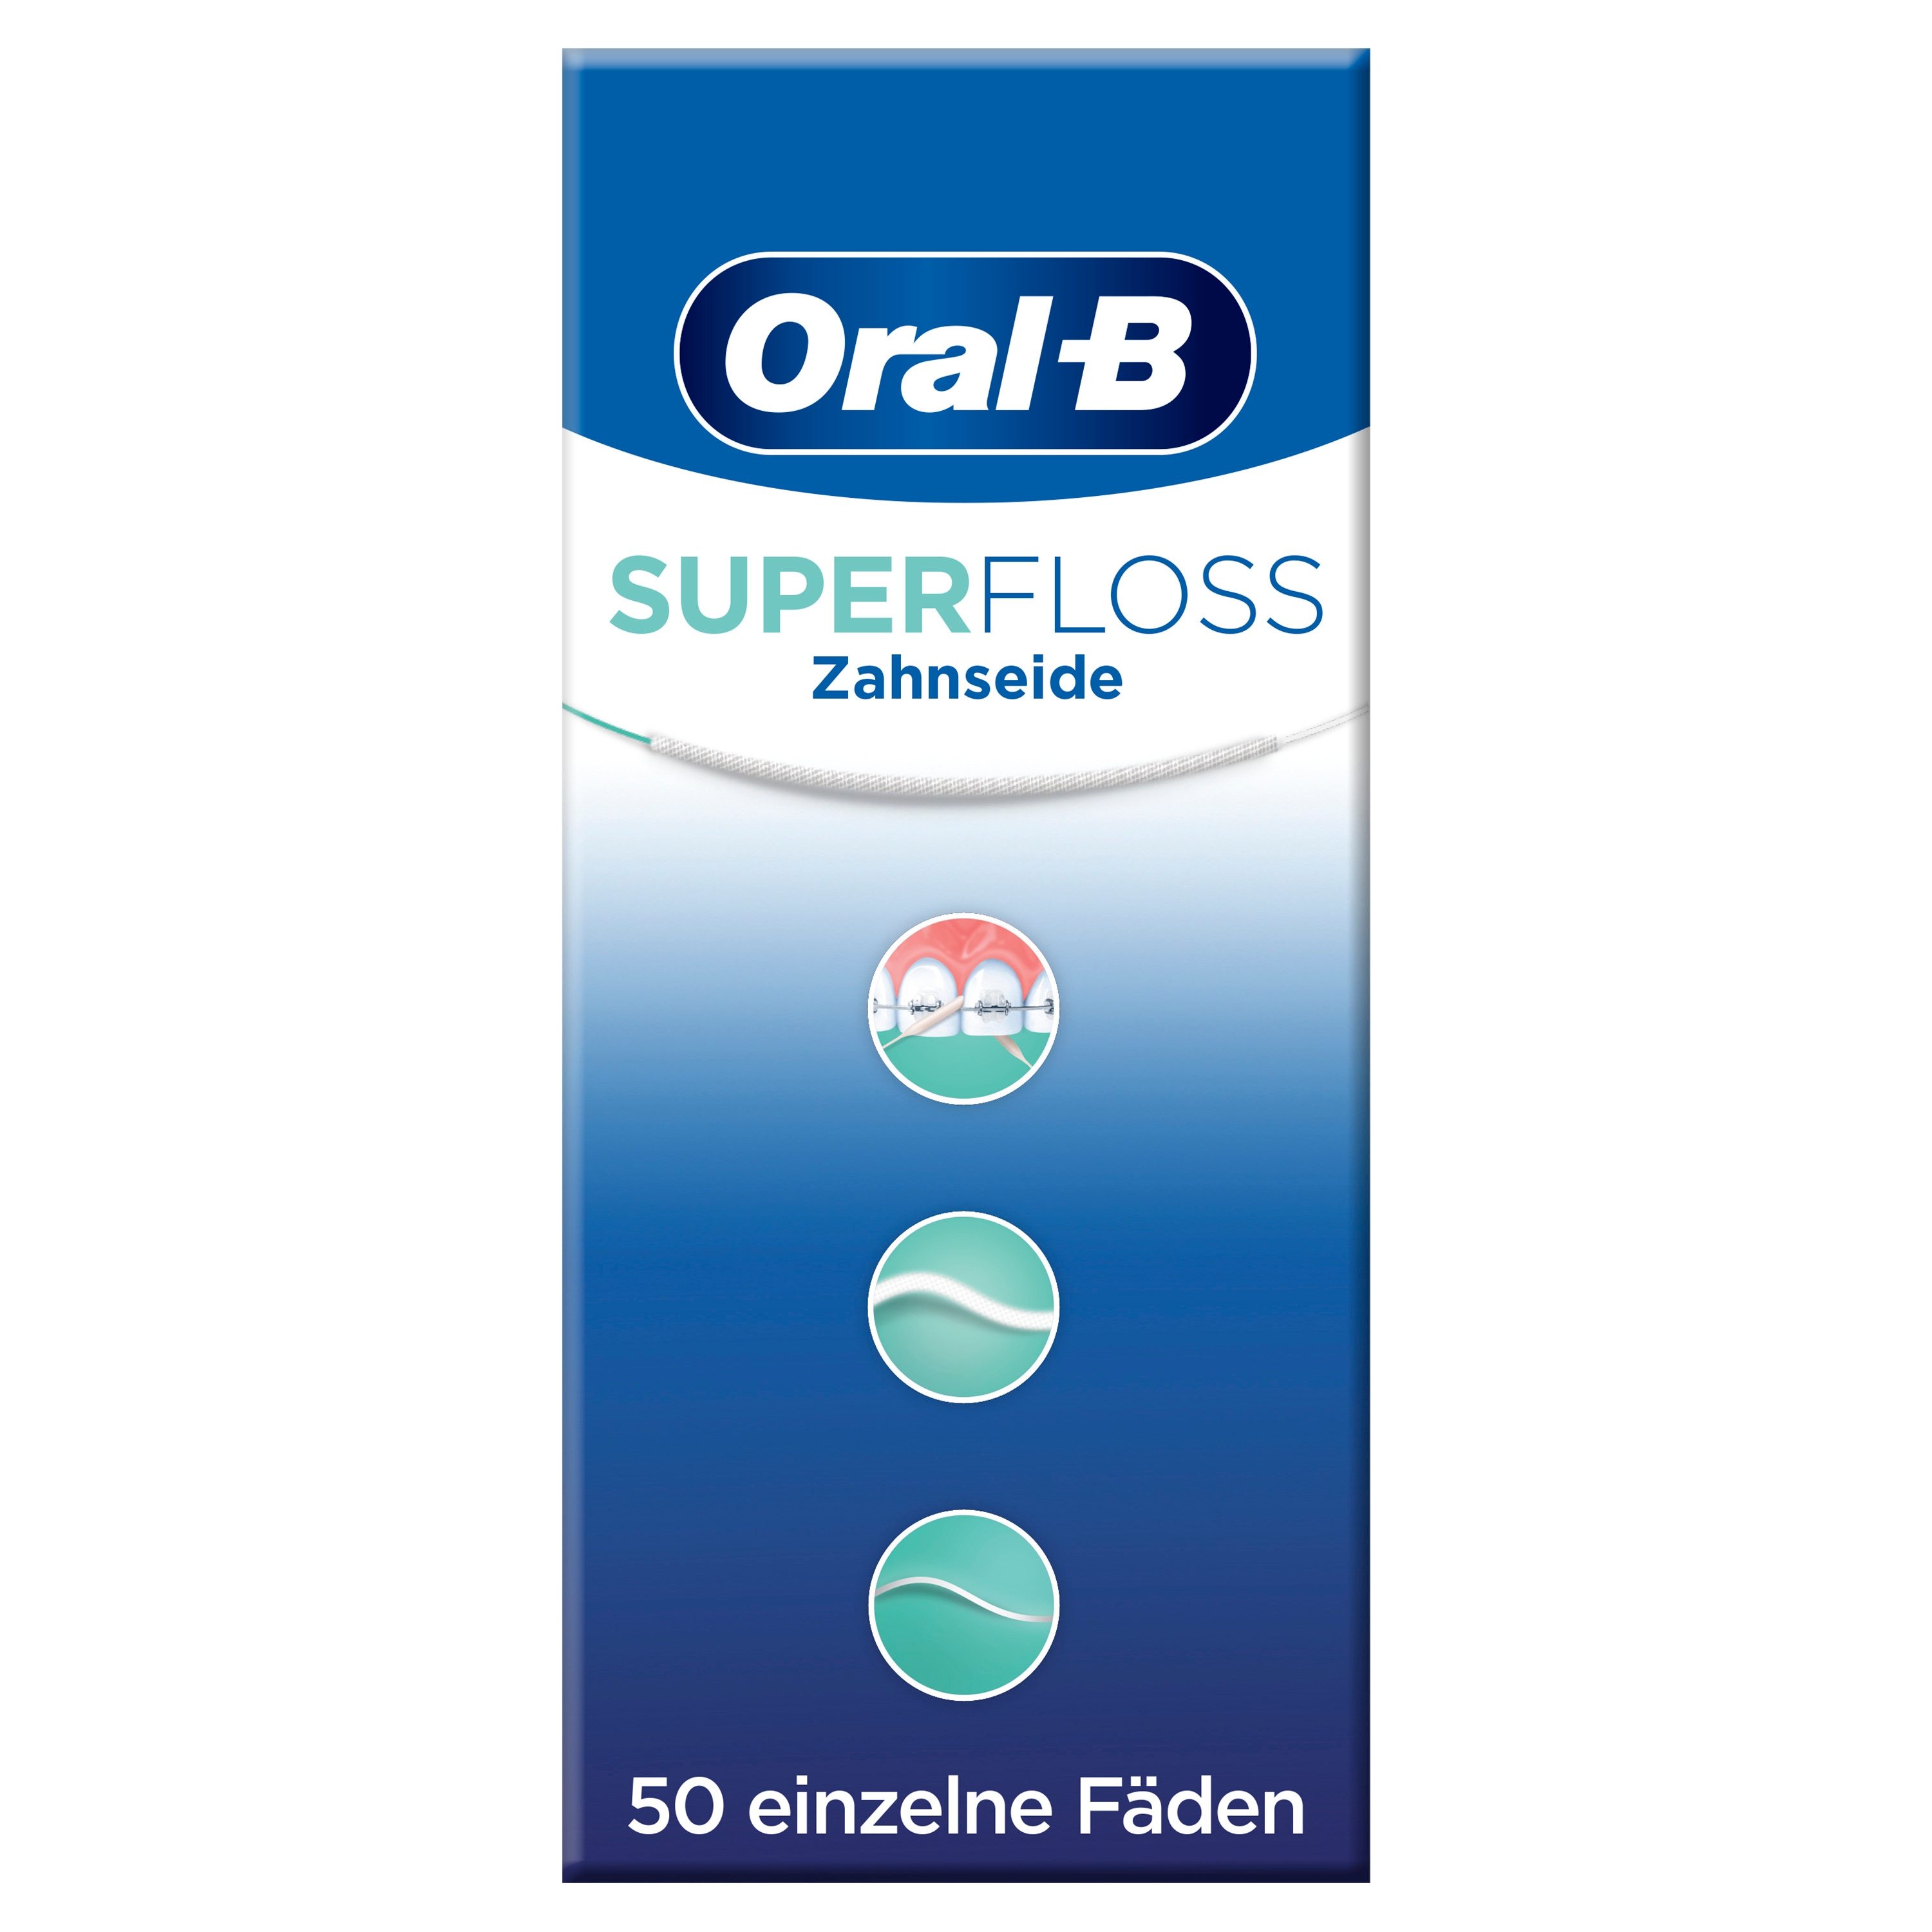 Product image from Oral B - Super Floss 50 Fäden